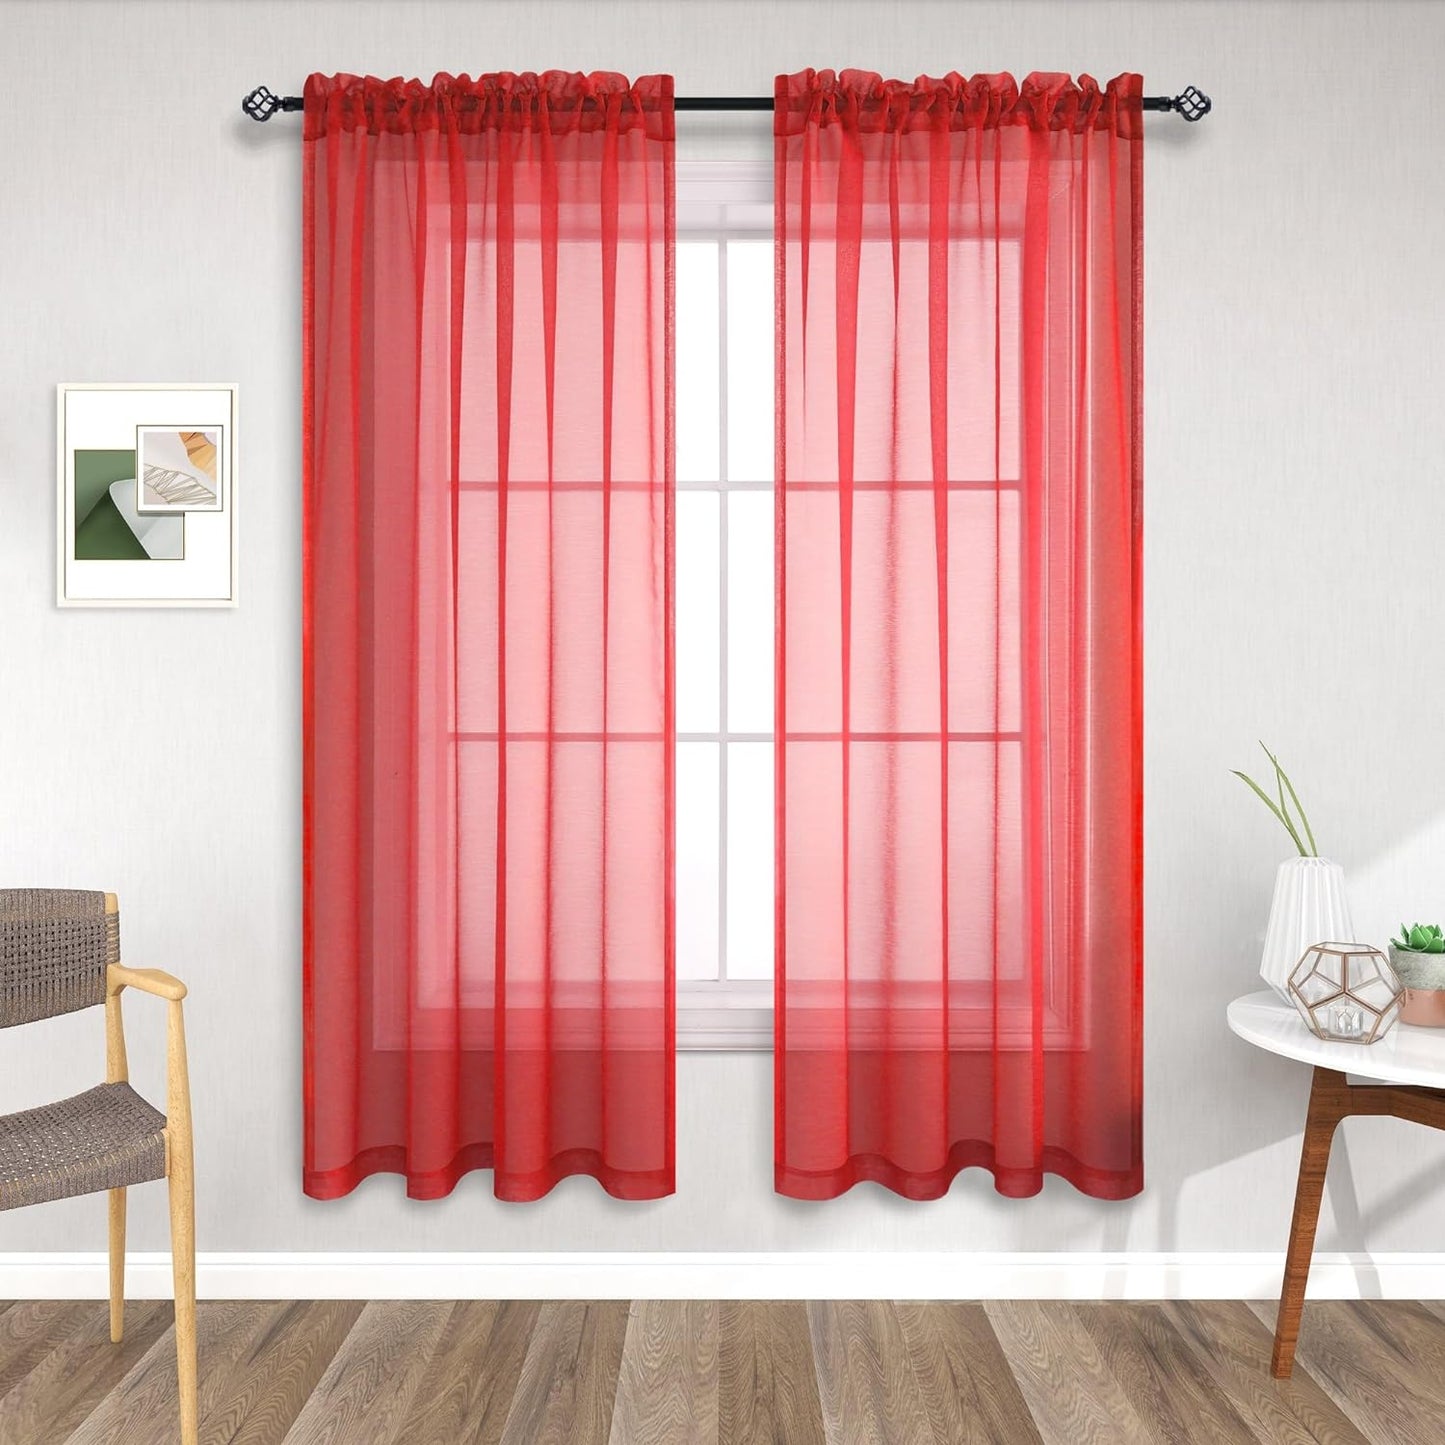 Terracotta Curtains 84 Inch Length for Living Room 2 Panel Sets Rod Pocket Sheer Curtains for Living Room Rust Burnt Orange Red  PITALK TEXTILE Red 52X63 